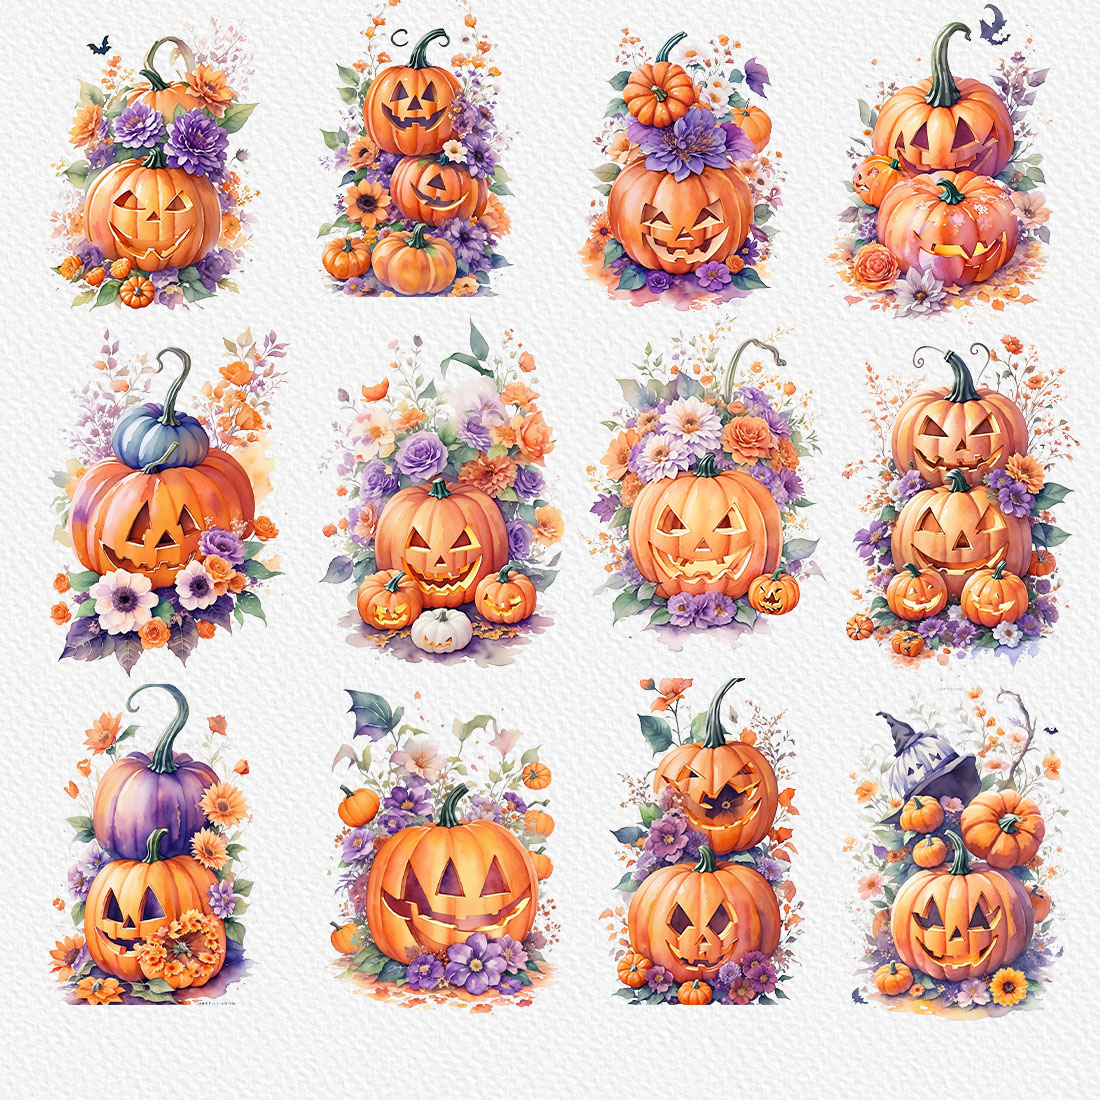 watercolor illustration Halloween scary pumpkin preview image.